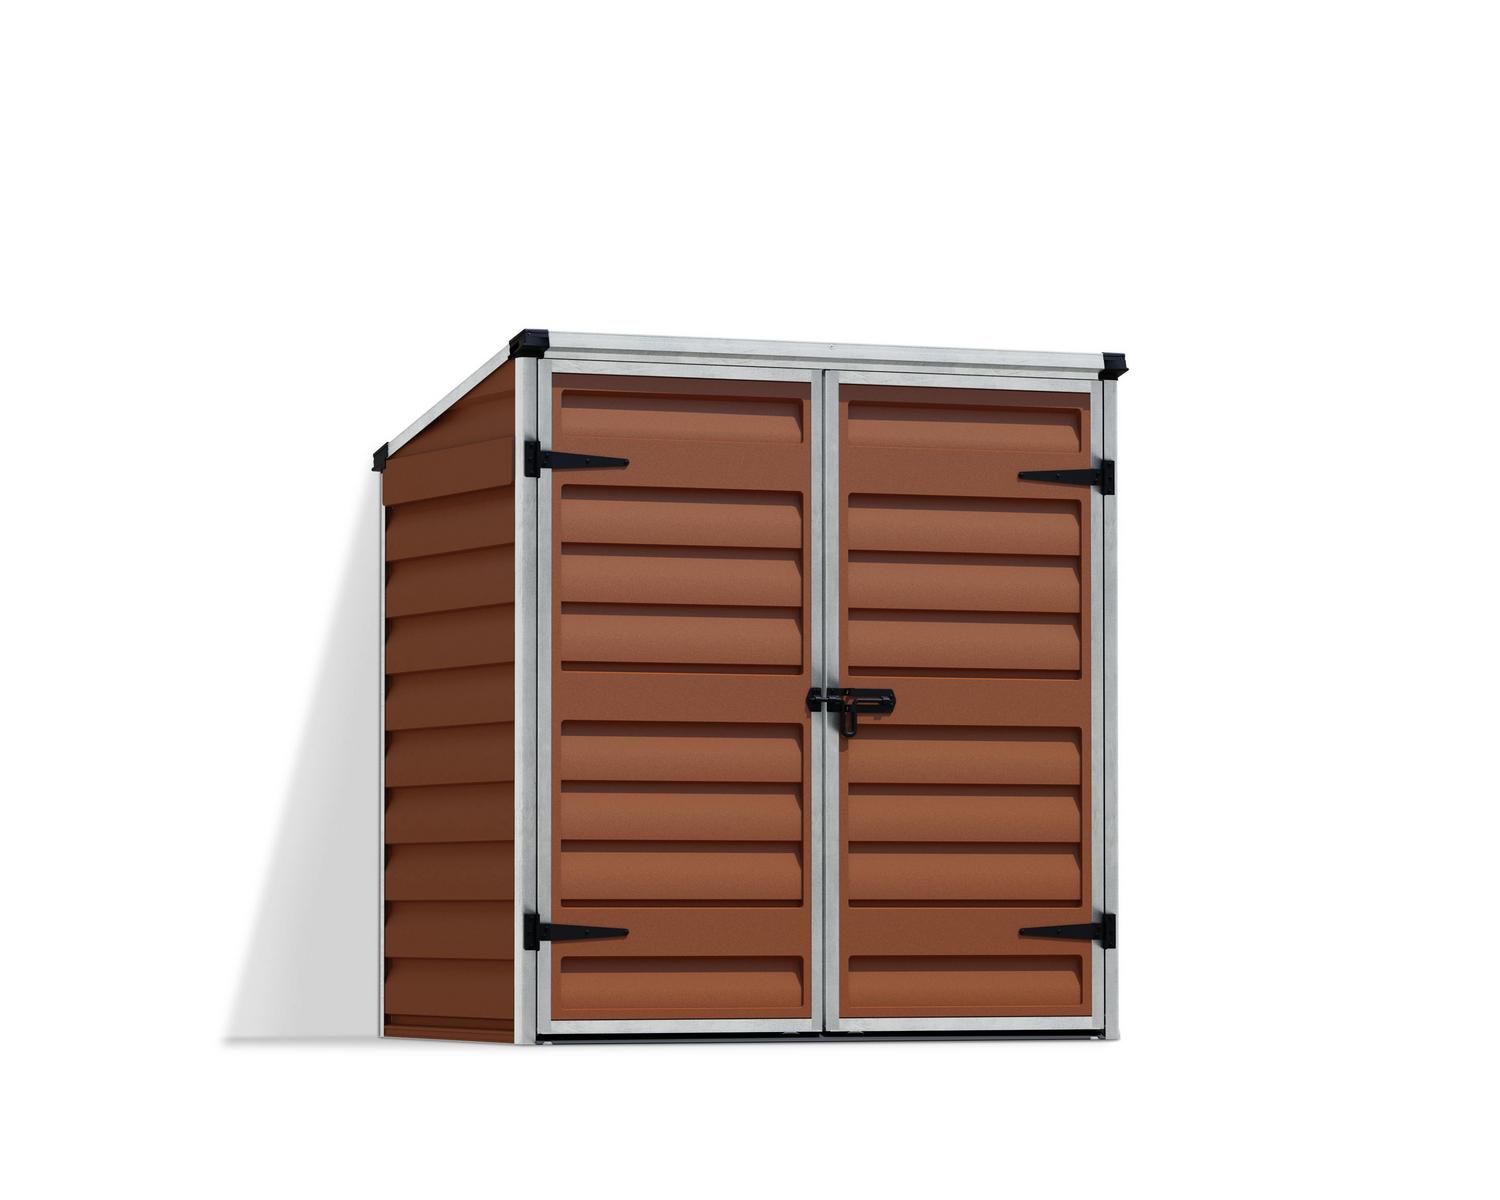 Voyager 2 ft. x 4 ft. Small Plastic Storage Shed with Amber Polycarbonate Panels & Aluminium Frame